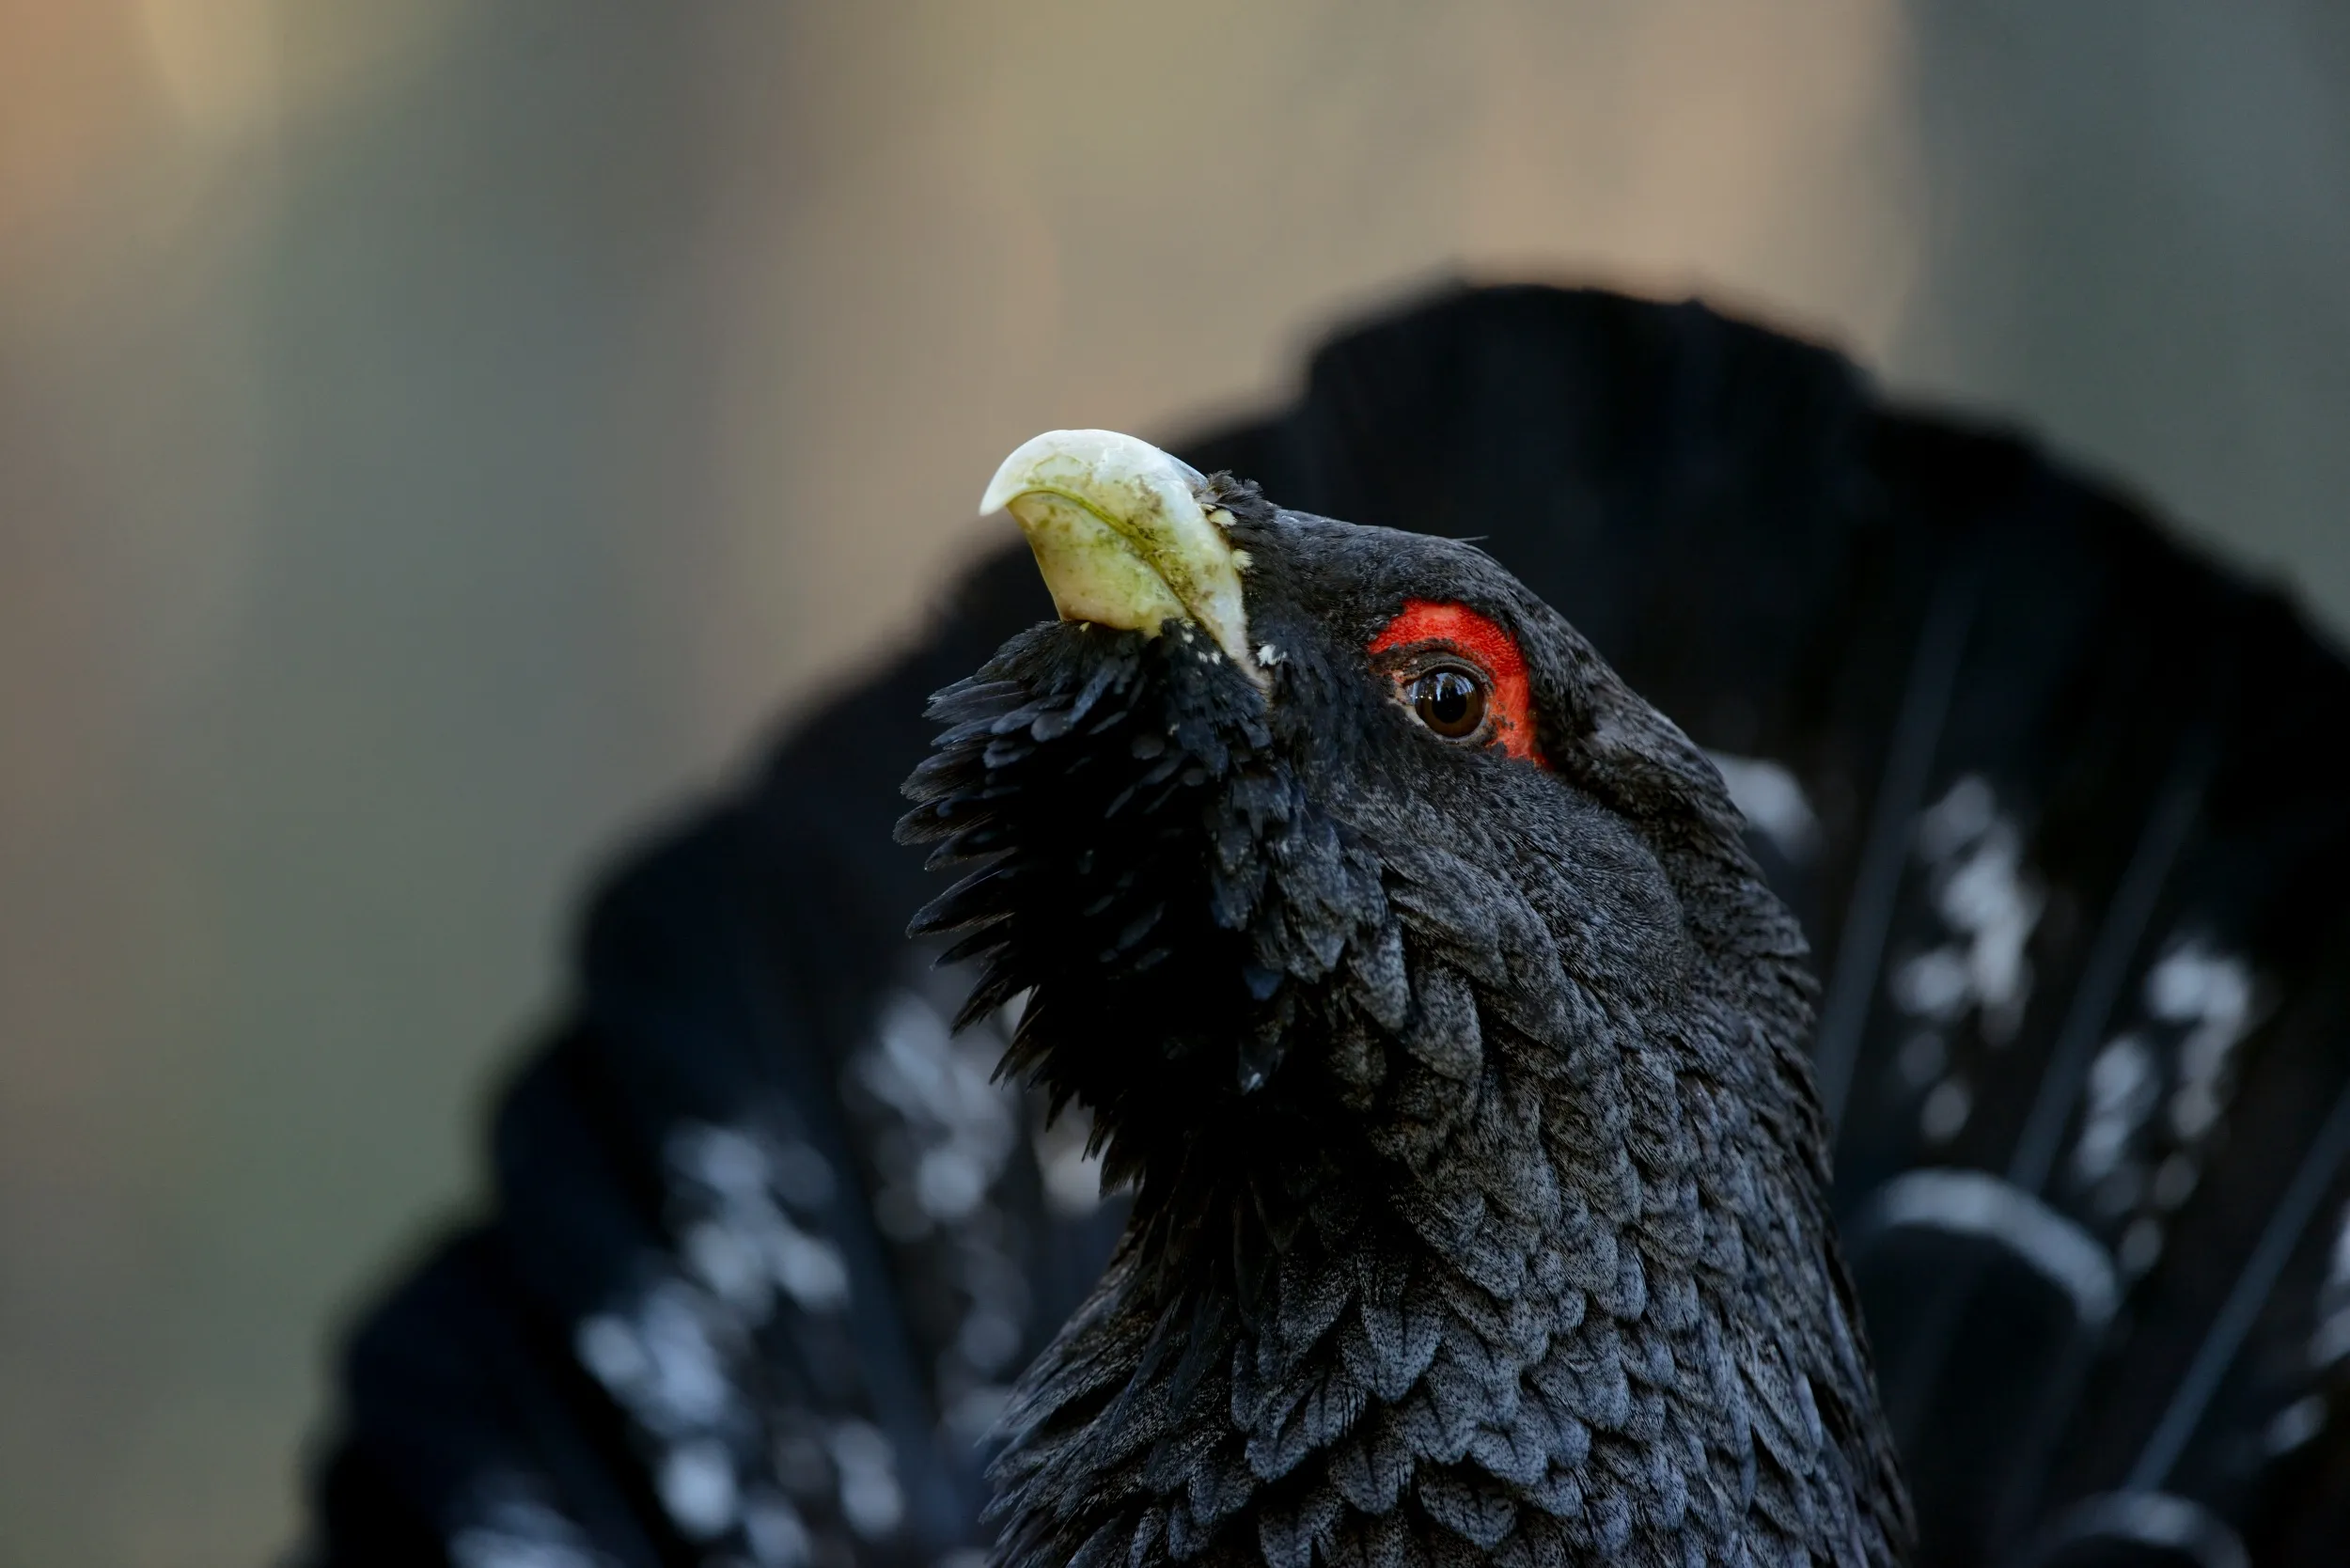 A male Capercaillie staring into the camera lens with its tail feathers fanned